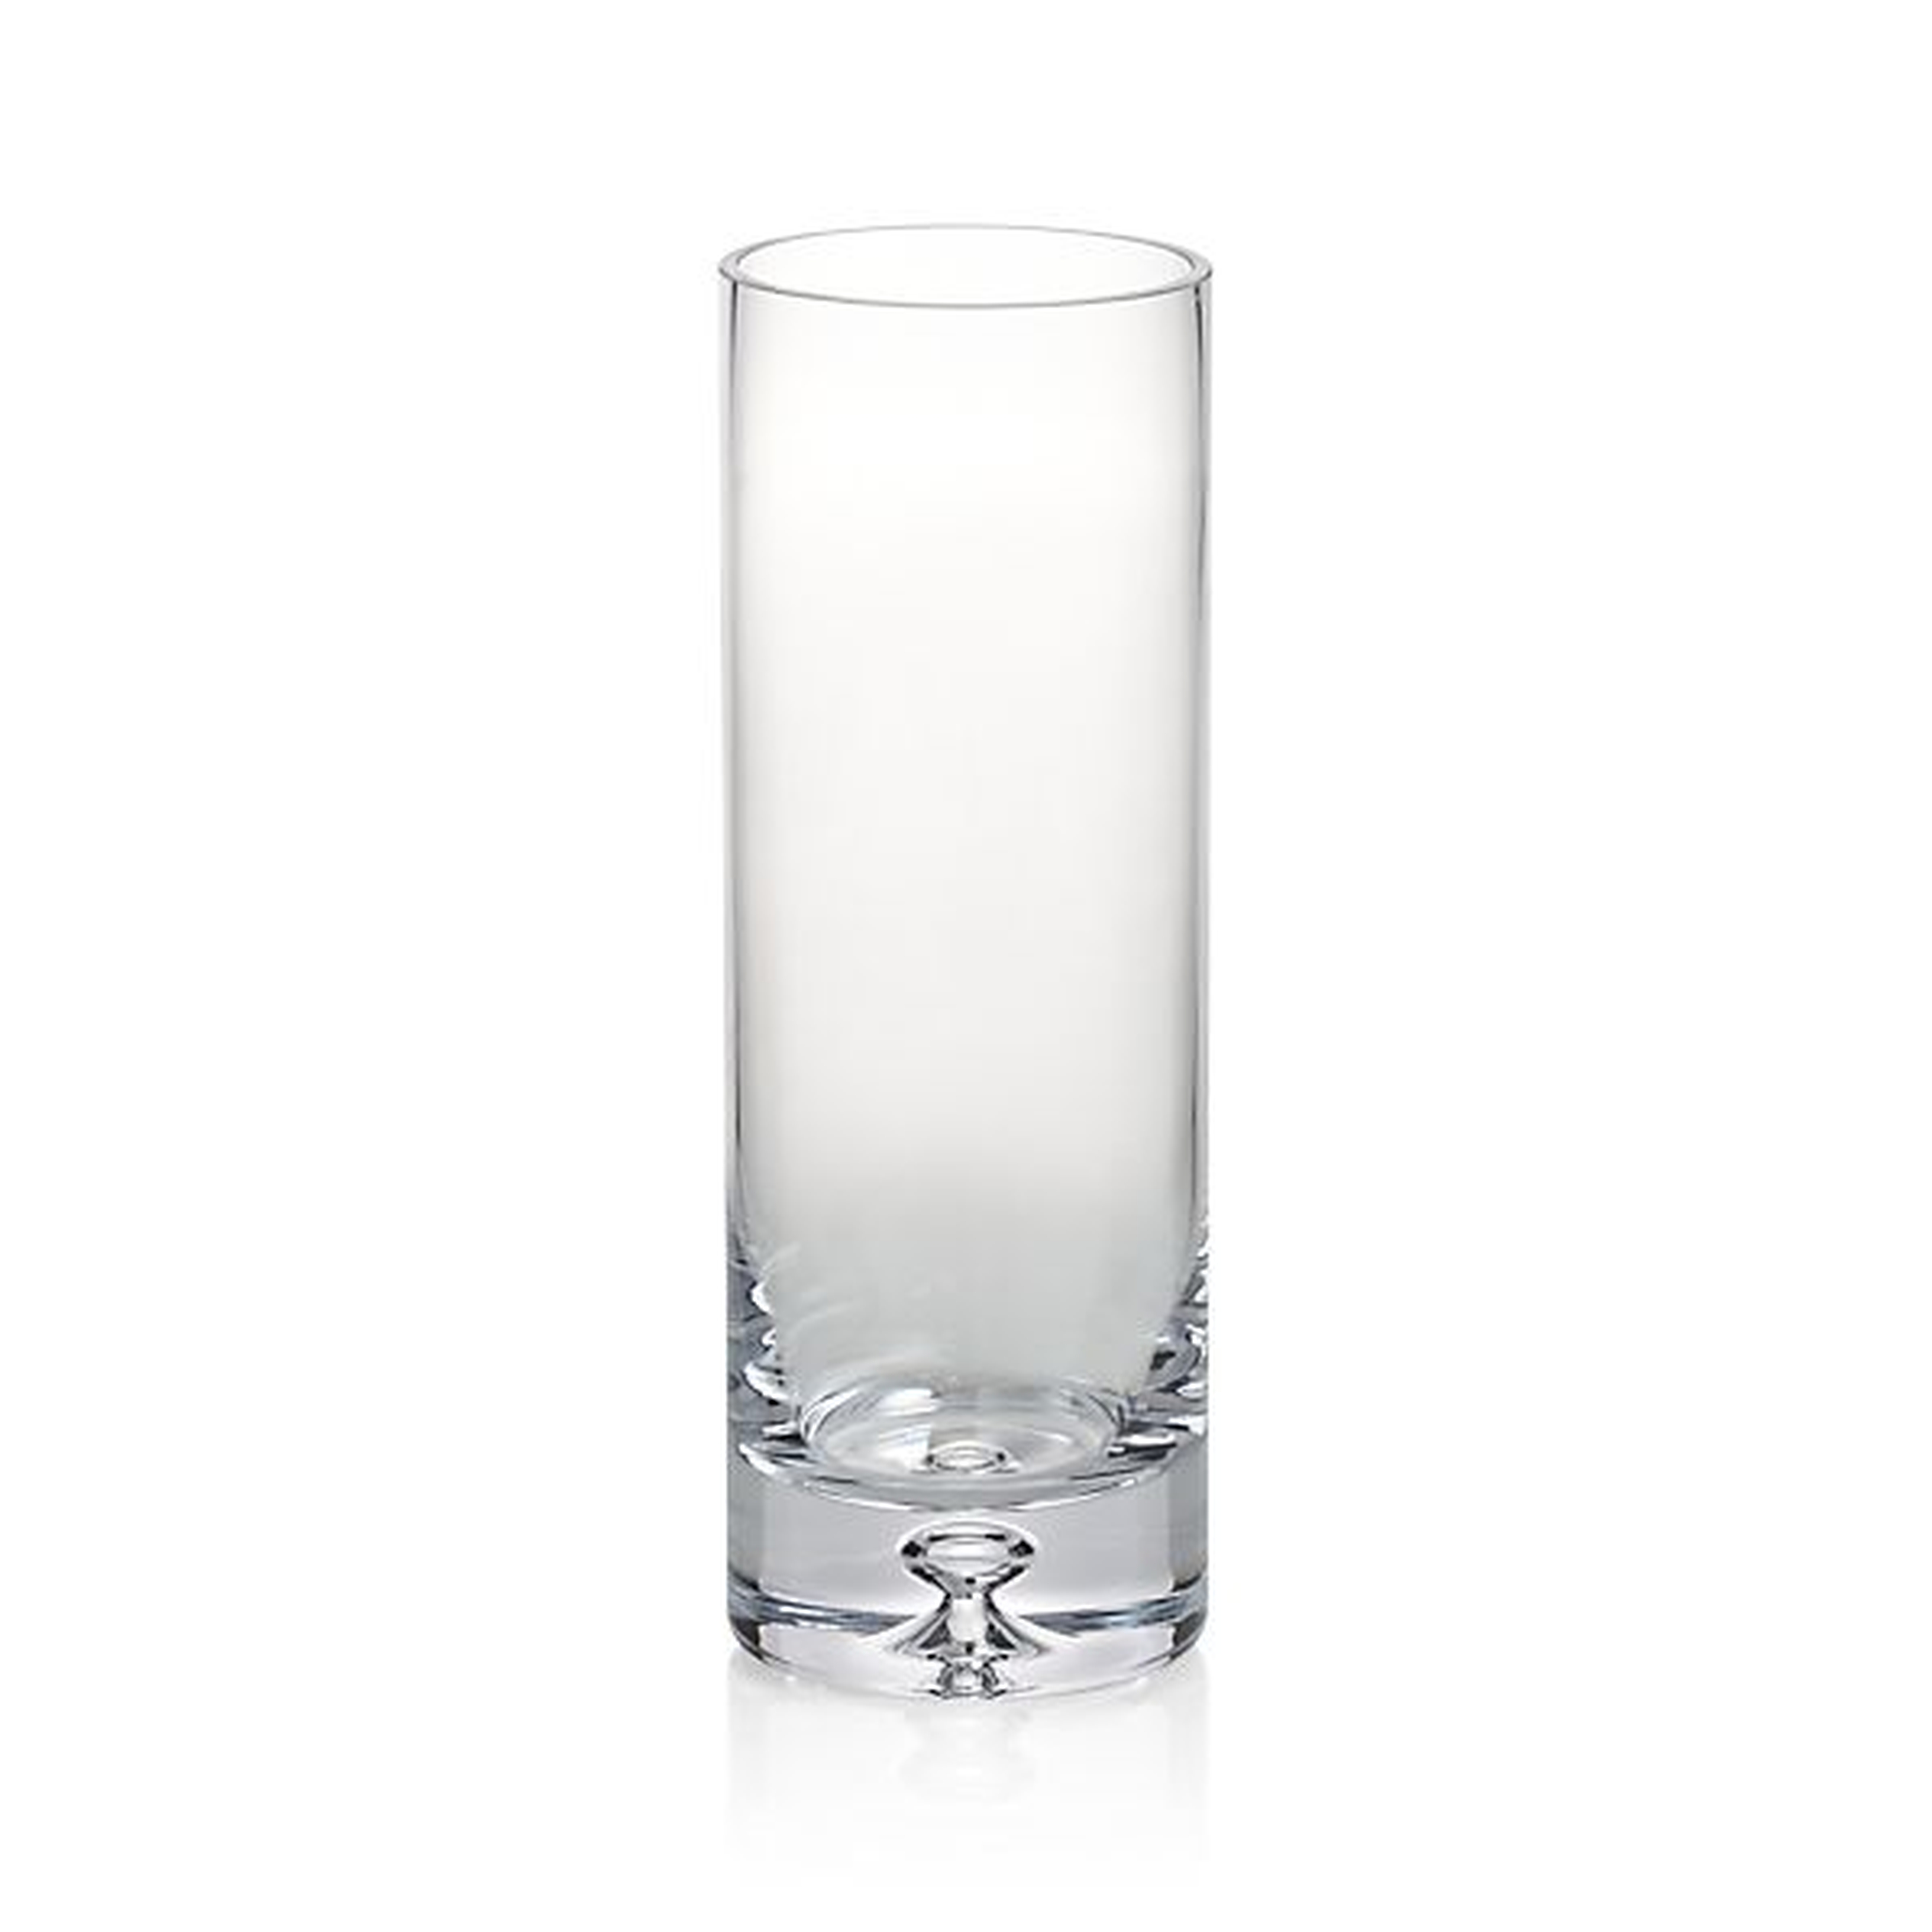 Direction Vase - Crate and Barrel